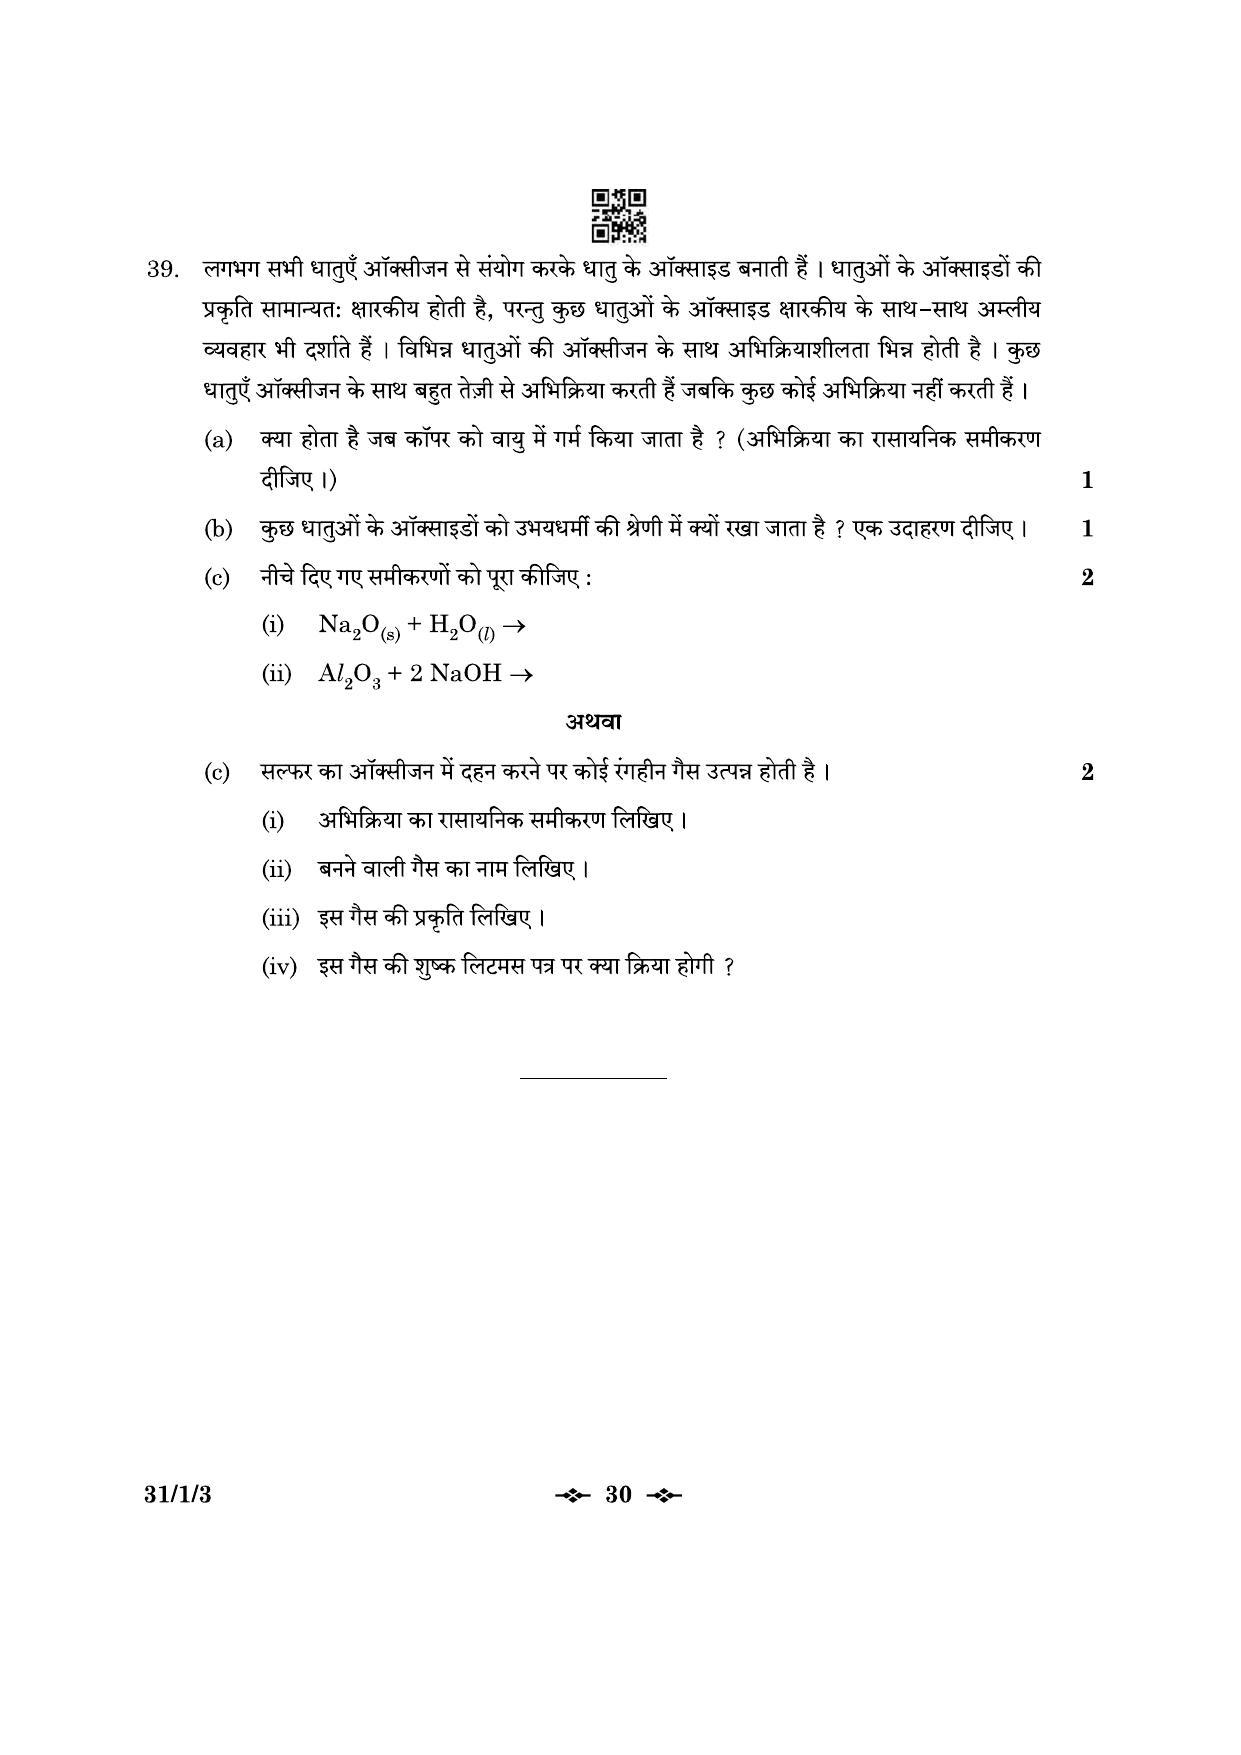 CBSE Class 10 31-1-3 Science 2023 Question Paper - Page 30